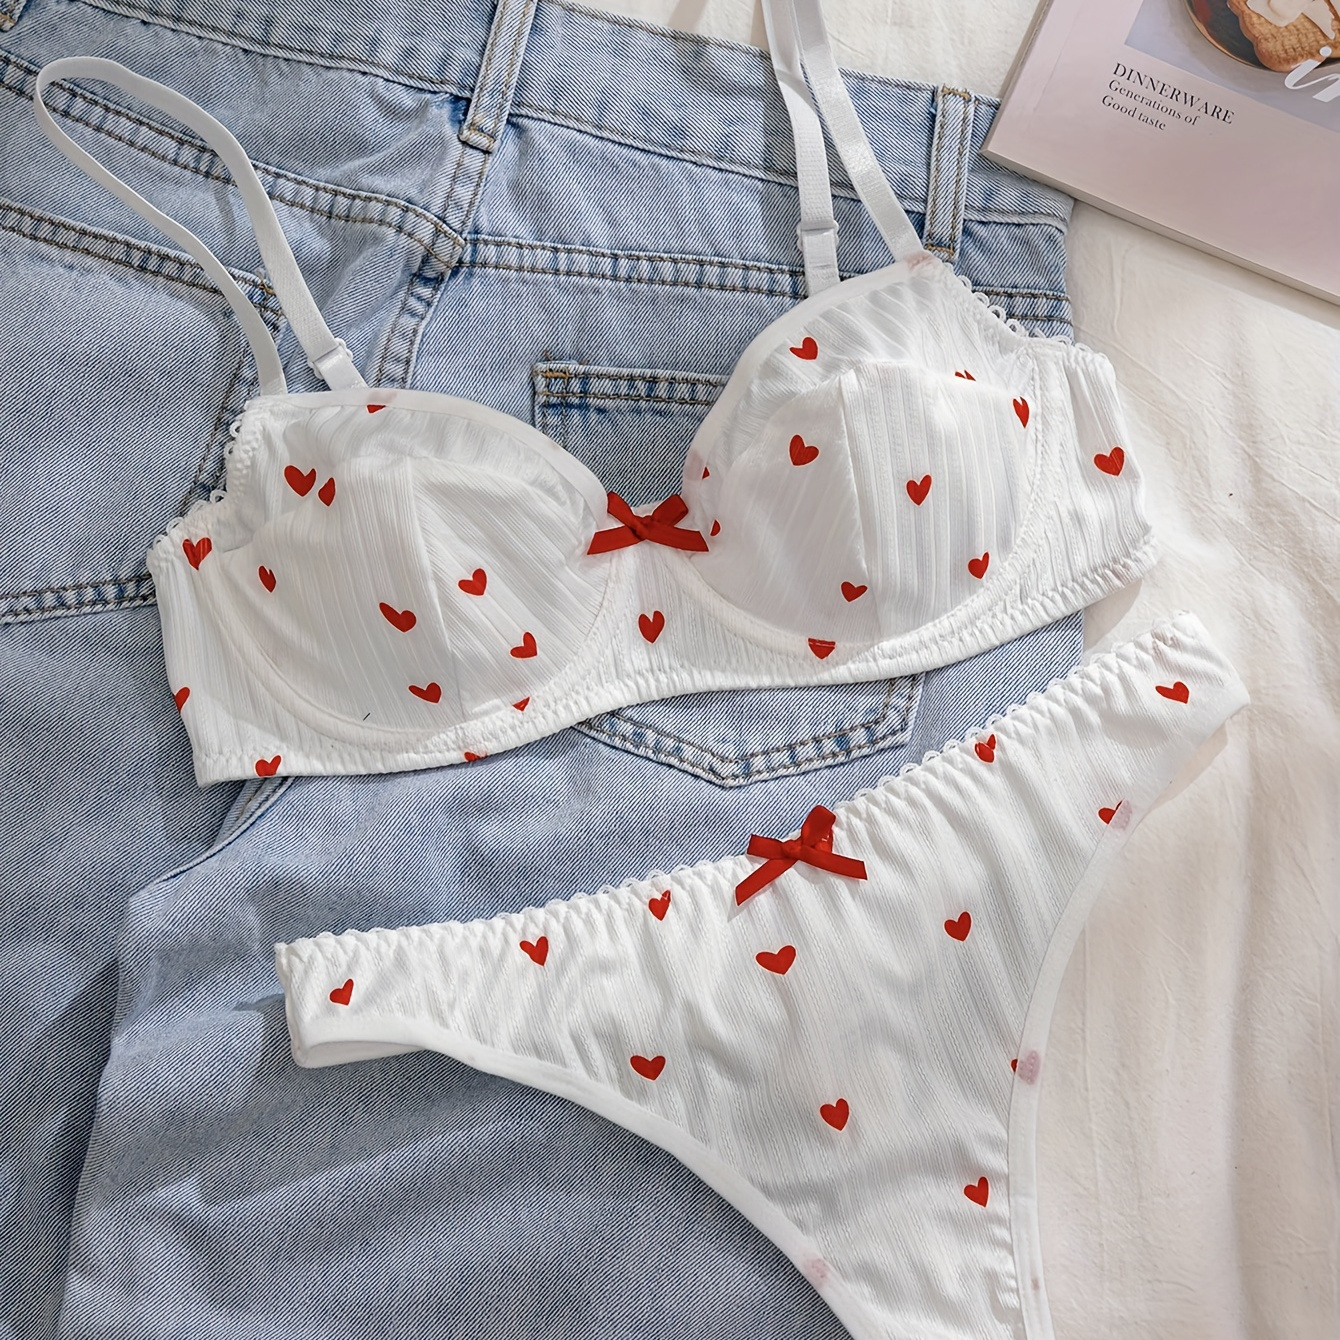 

Women's Elegant Bow-knot Lingerie Set, Heart Print, Comfortable Underwear, Bra And Panty Ensemble, Breathable Fabric, White With Red Accents, Daily Wear